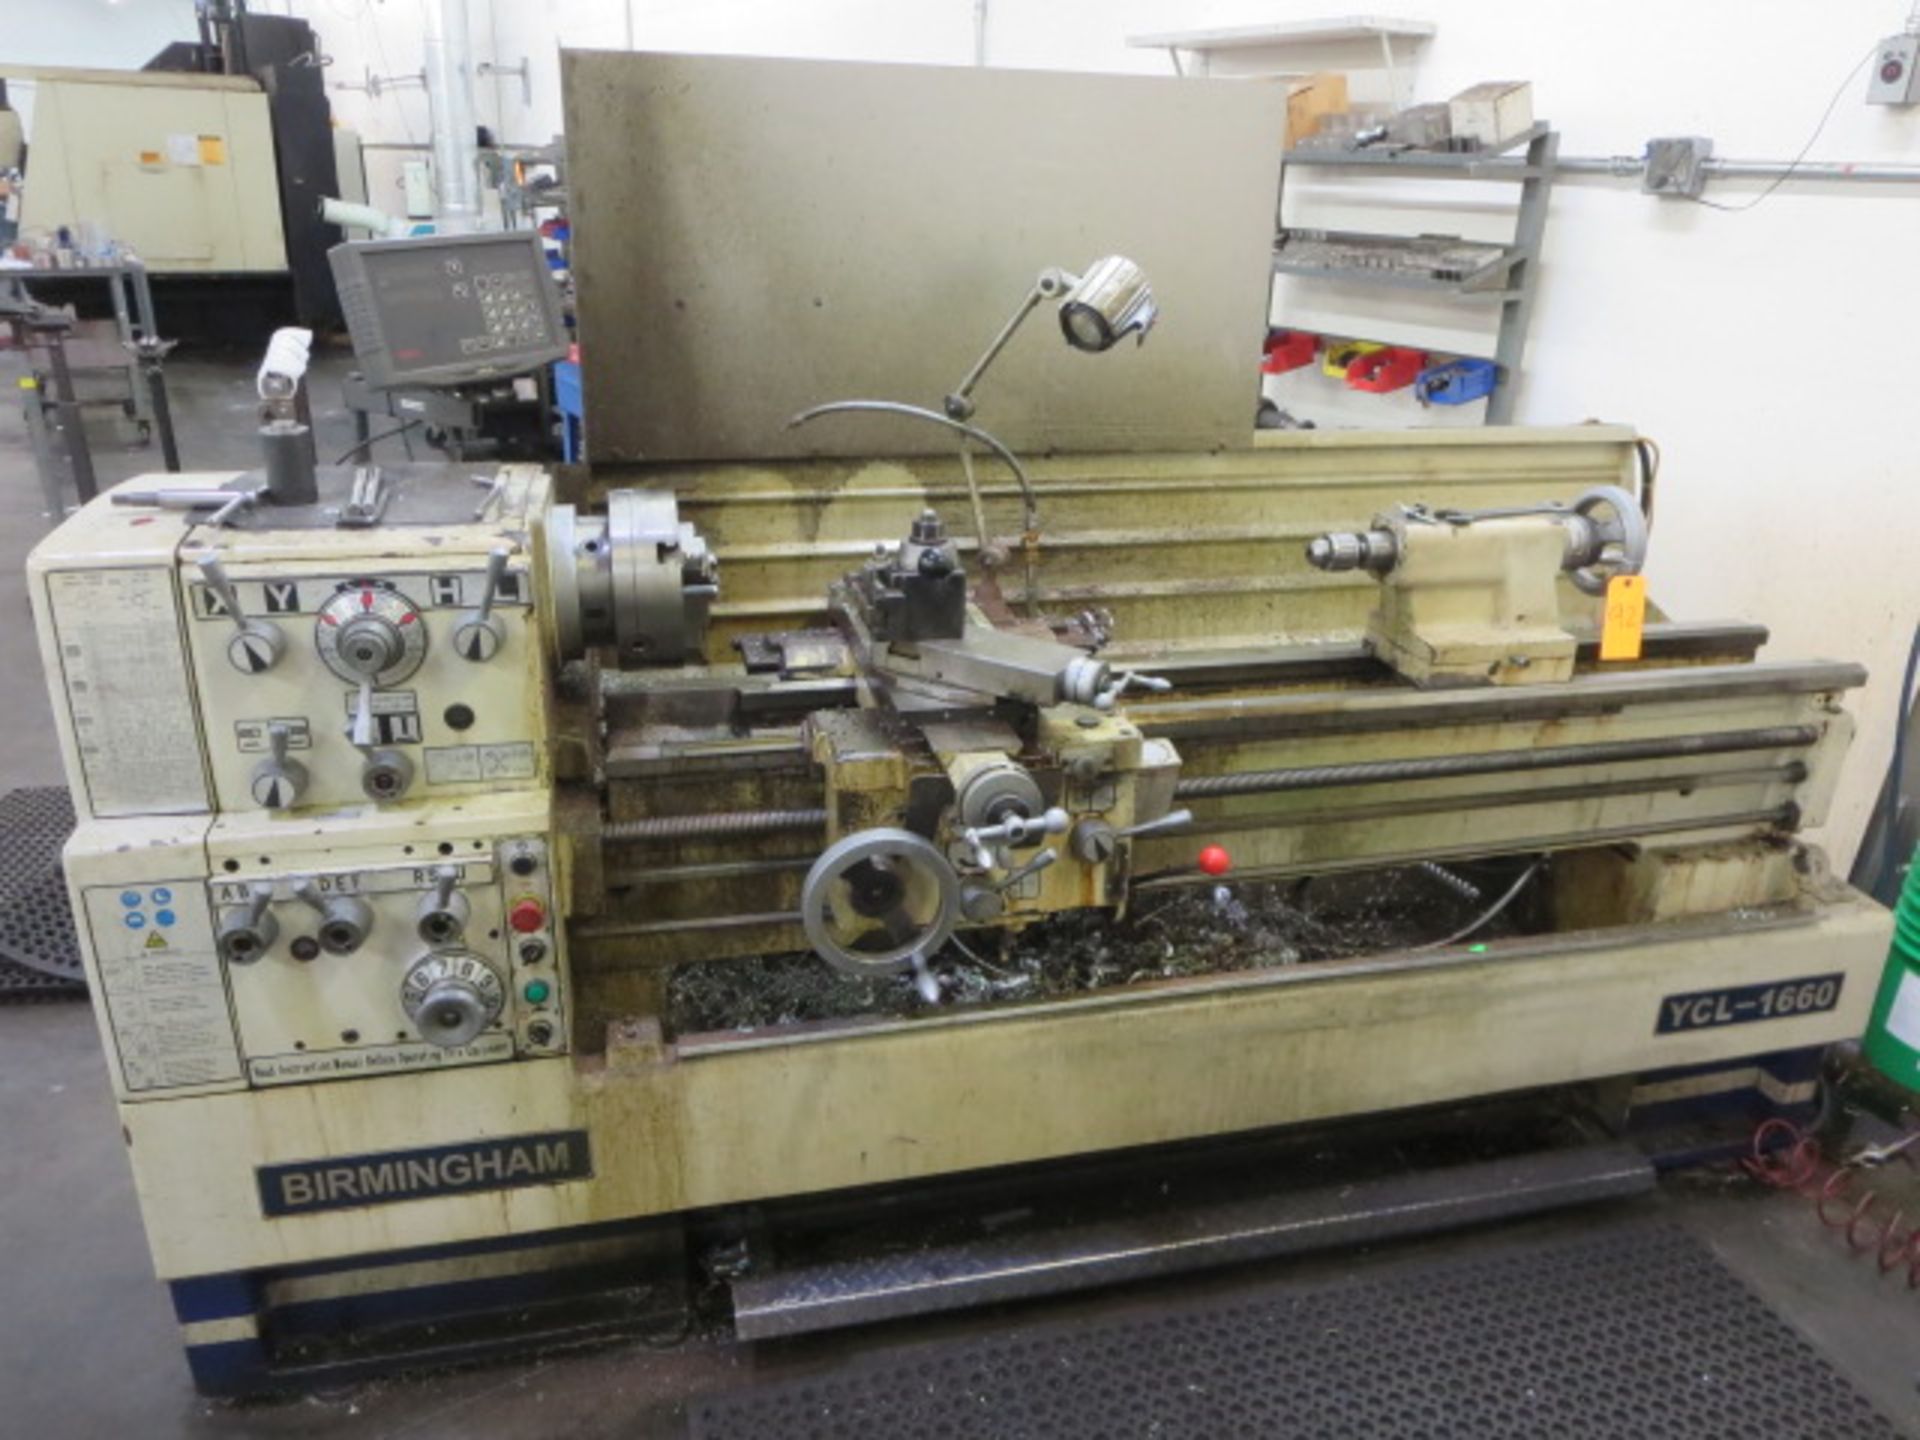 Birmingham Precision Gap Bed Lathe, with SDS 2L Control, 7.5HP, 220/440V, model YCL-1660, sn 710491,